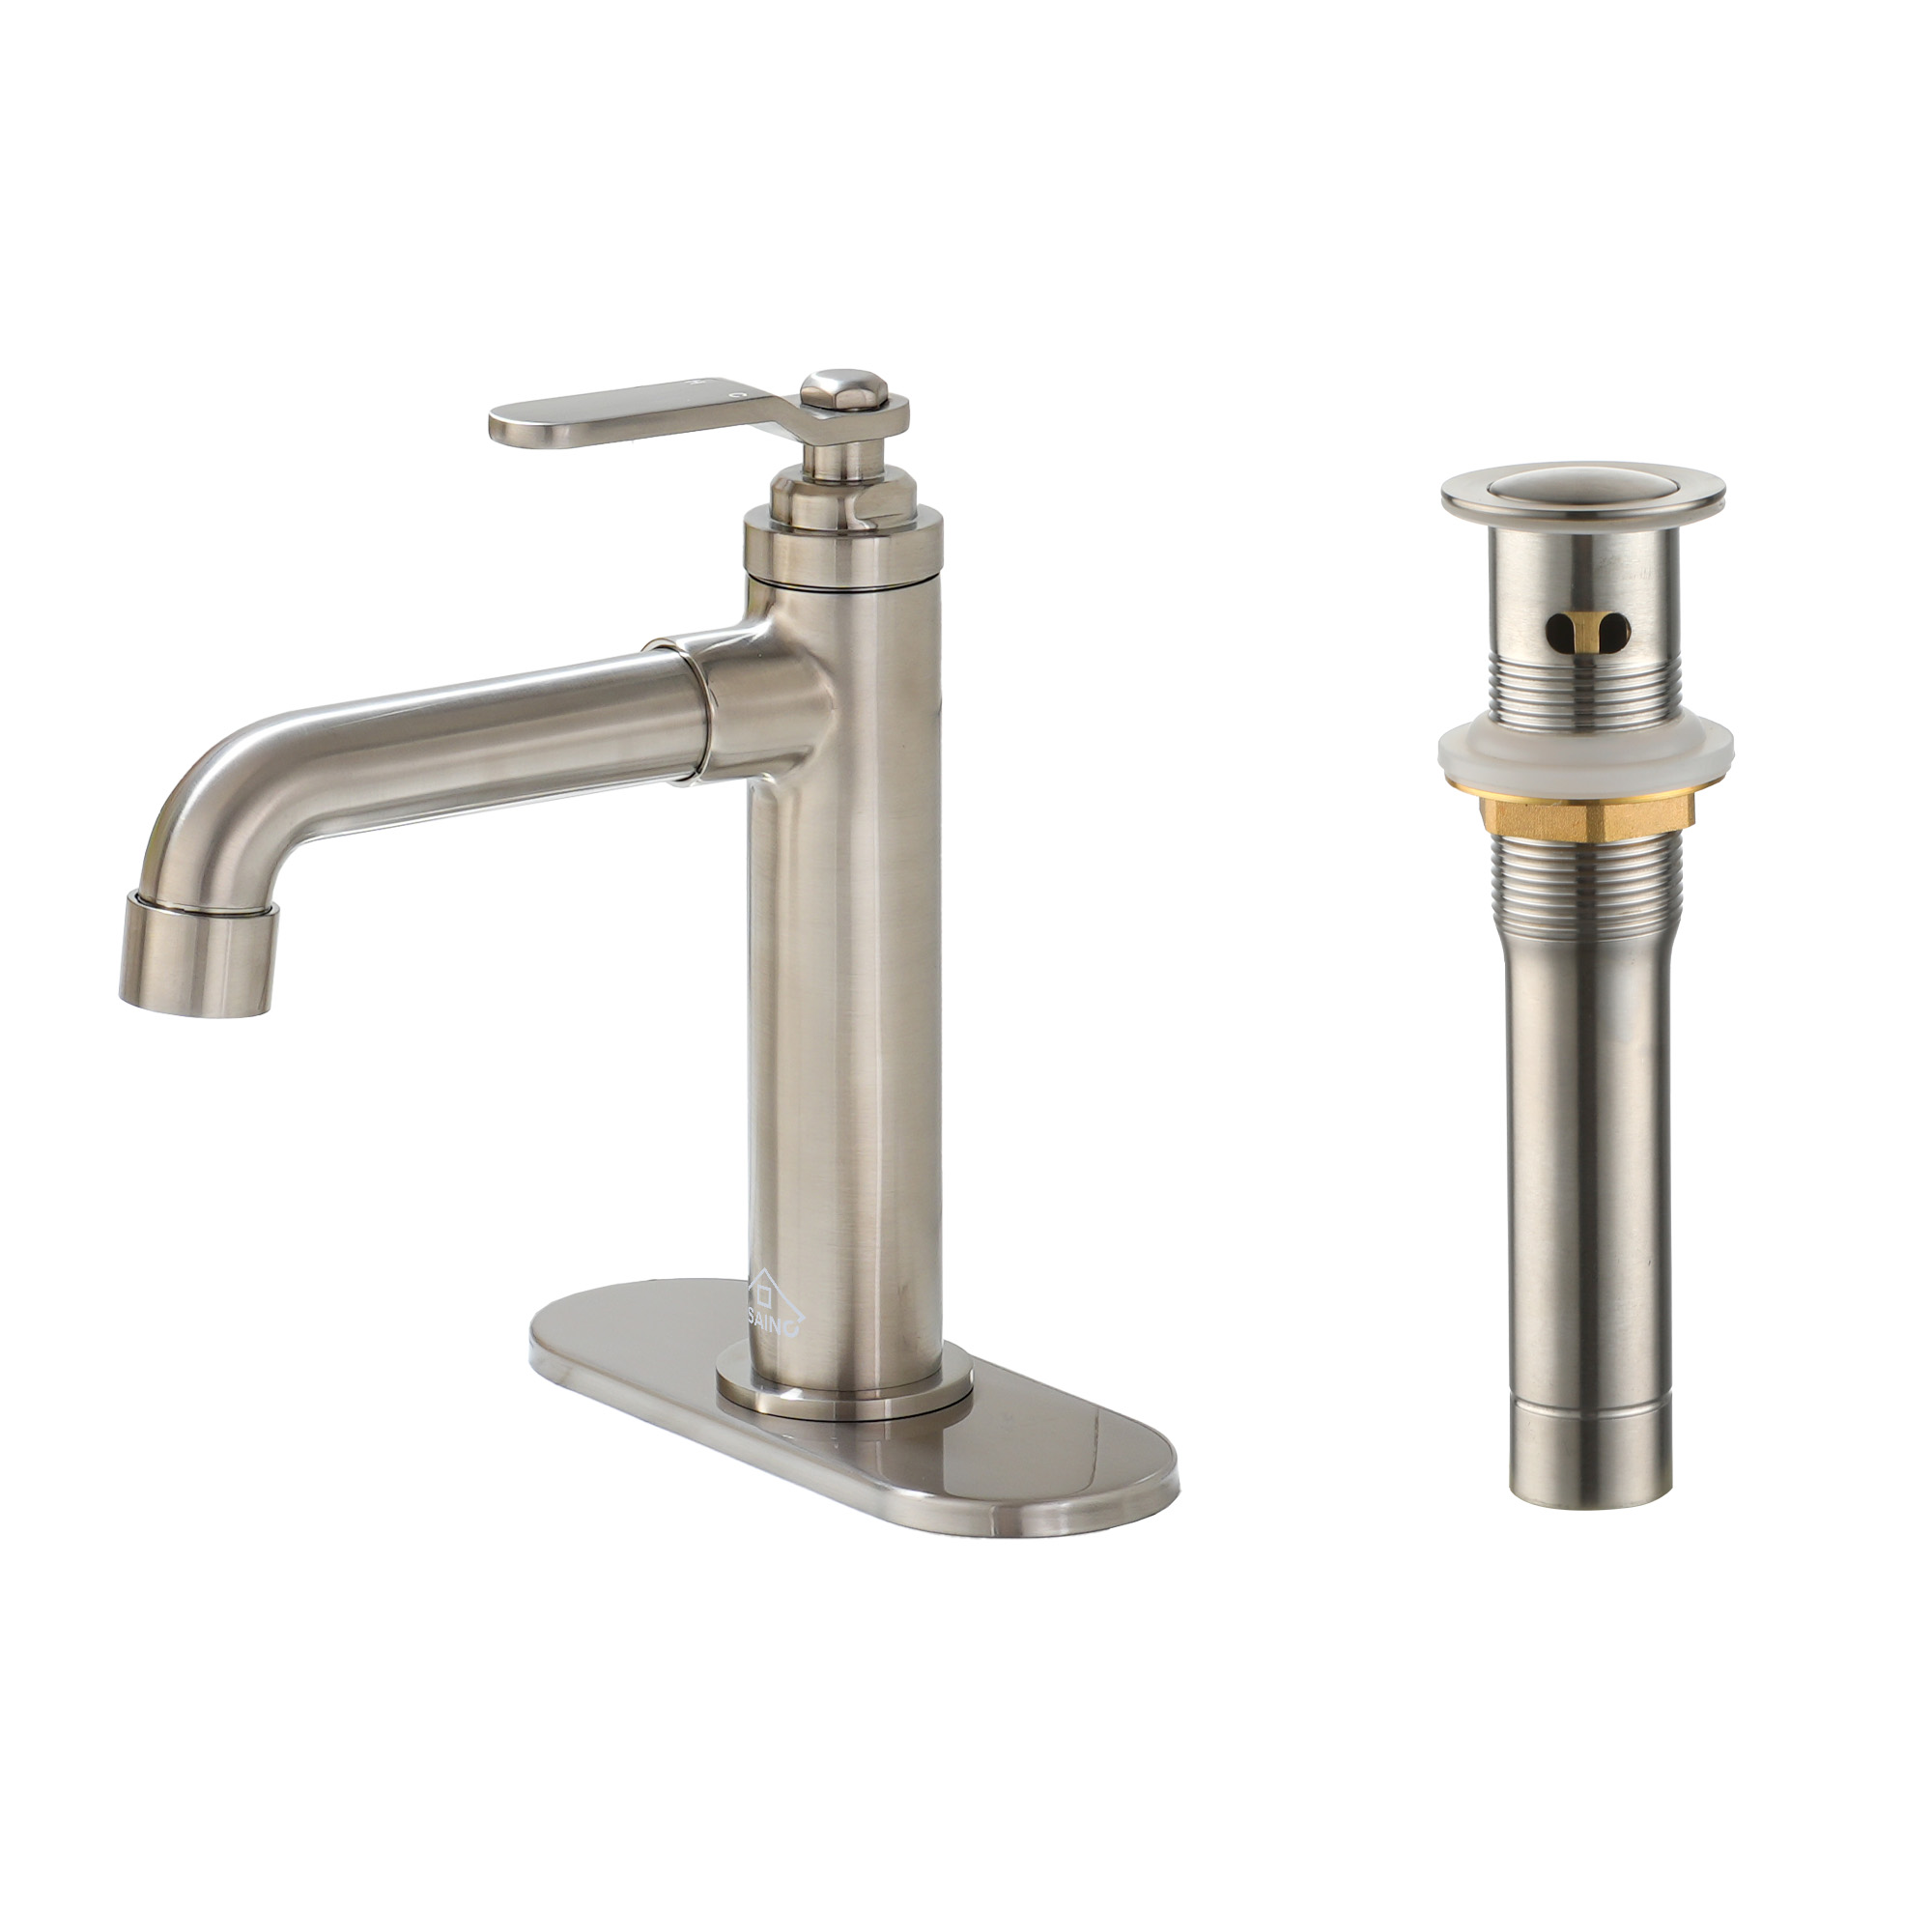 Single Handle Brass Bathroom Sink Faucet 1 or 3 Hole Deck Mount Vanity Faucet Vanity Mixer Faucet RV Commercial Restroom Faucet with Metal Pop-Up Drain and Supply Line